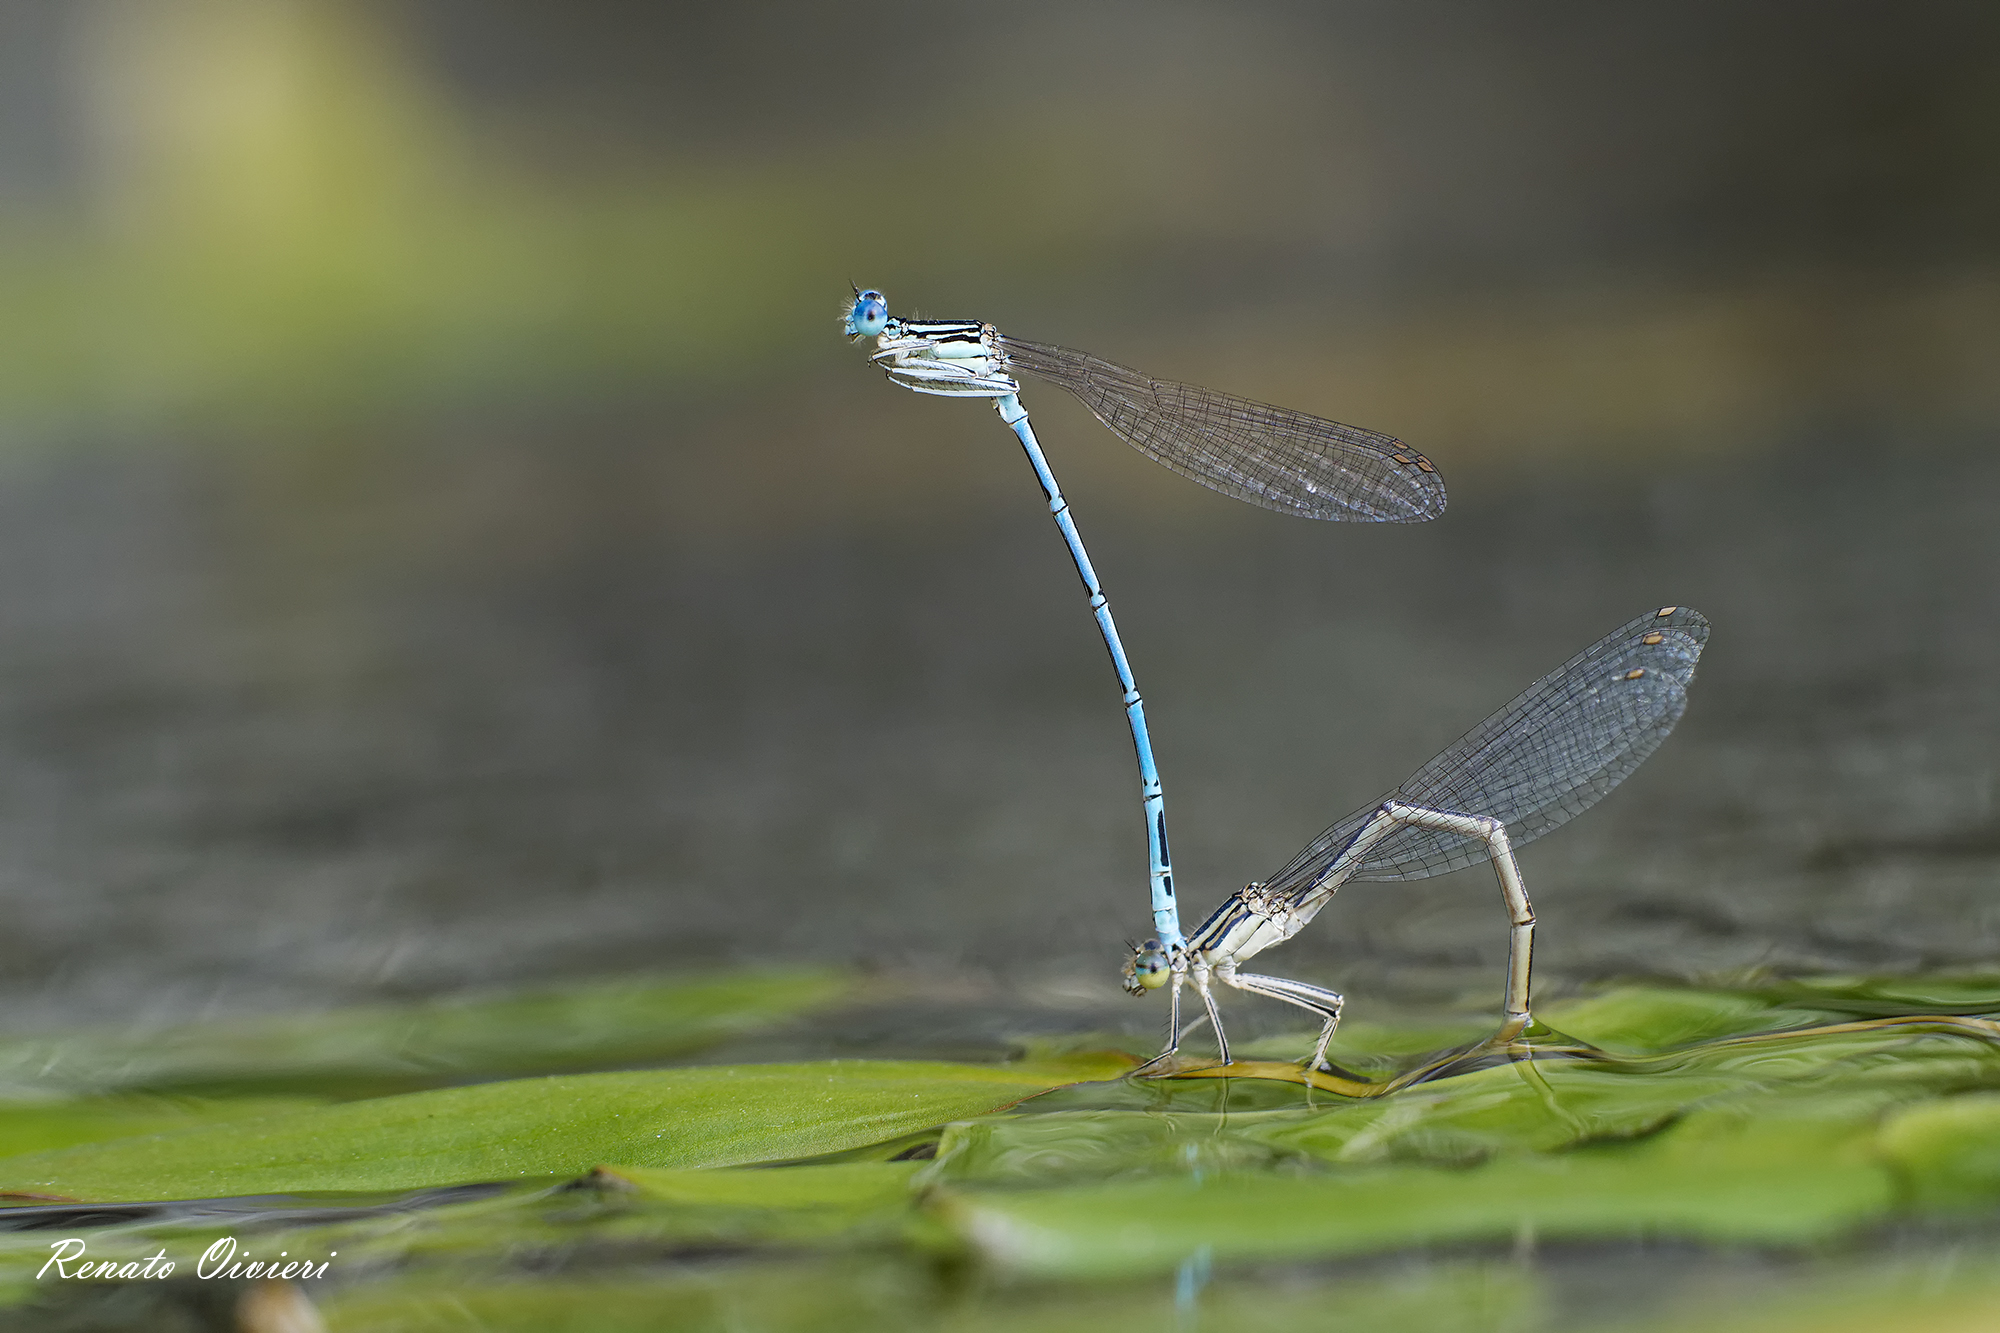 Mating dragonflies...